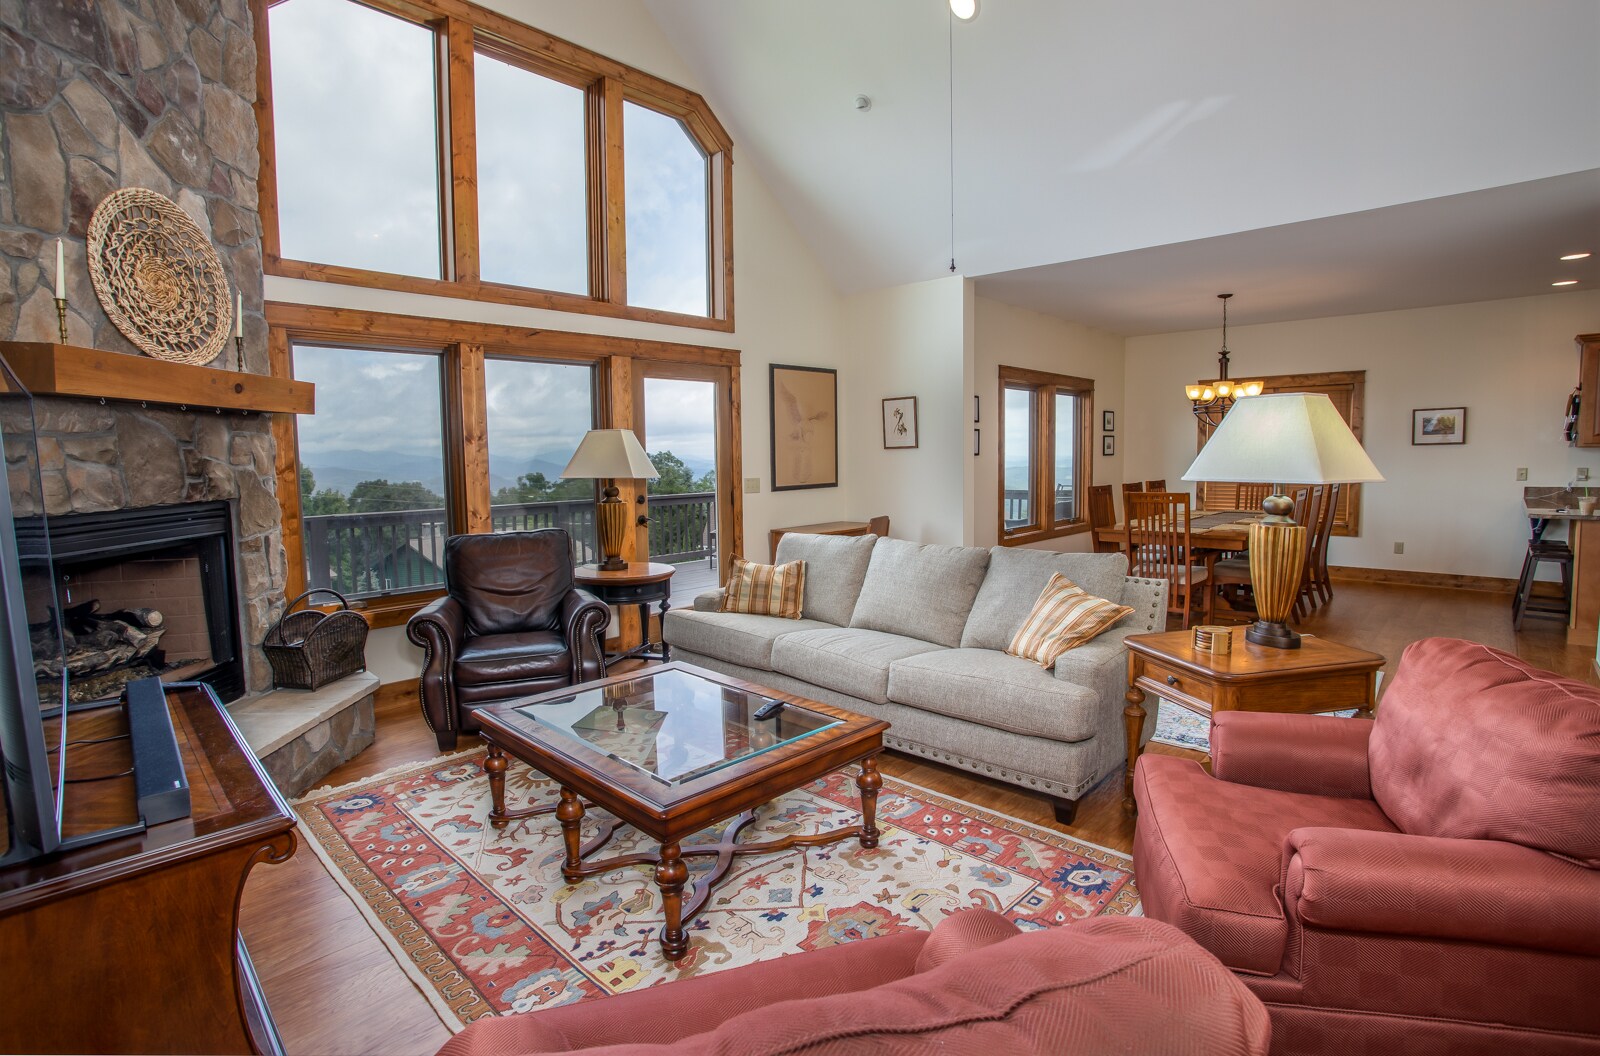 Enjoy the Amazing Views from the Great Room at Bald Eagle Bluff!